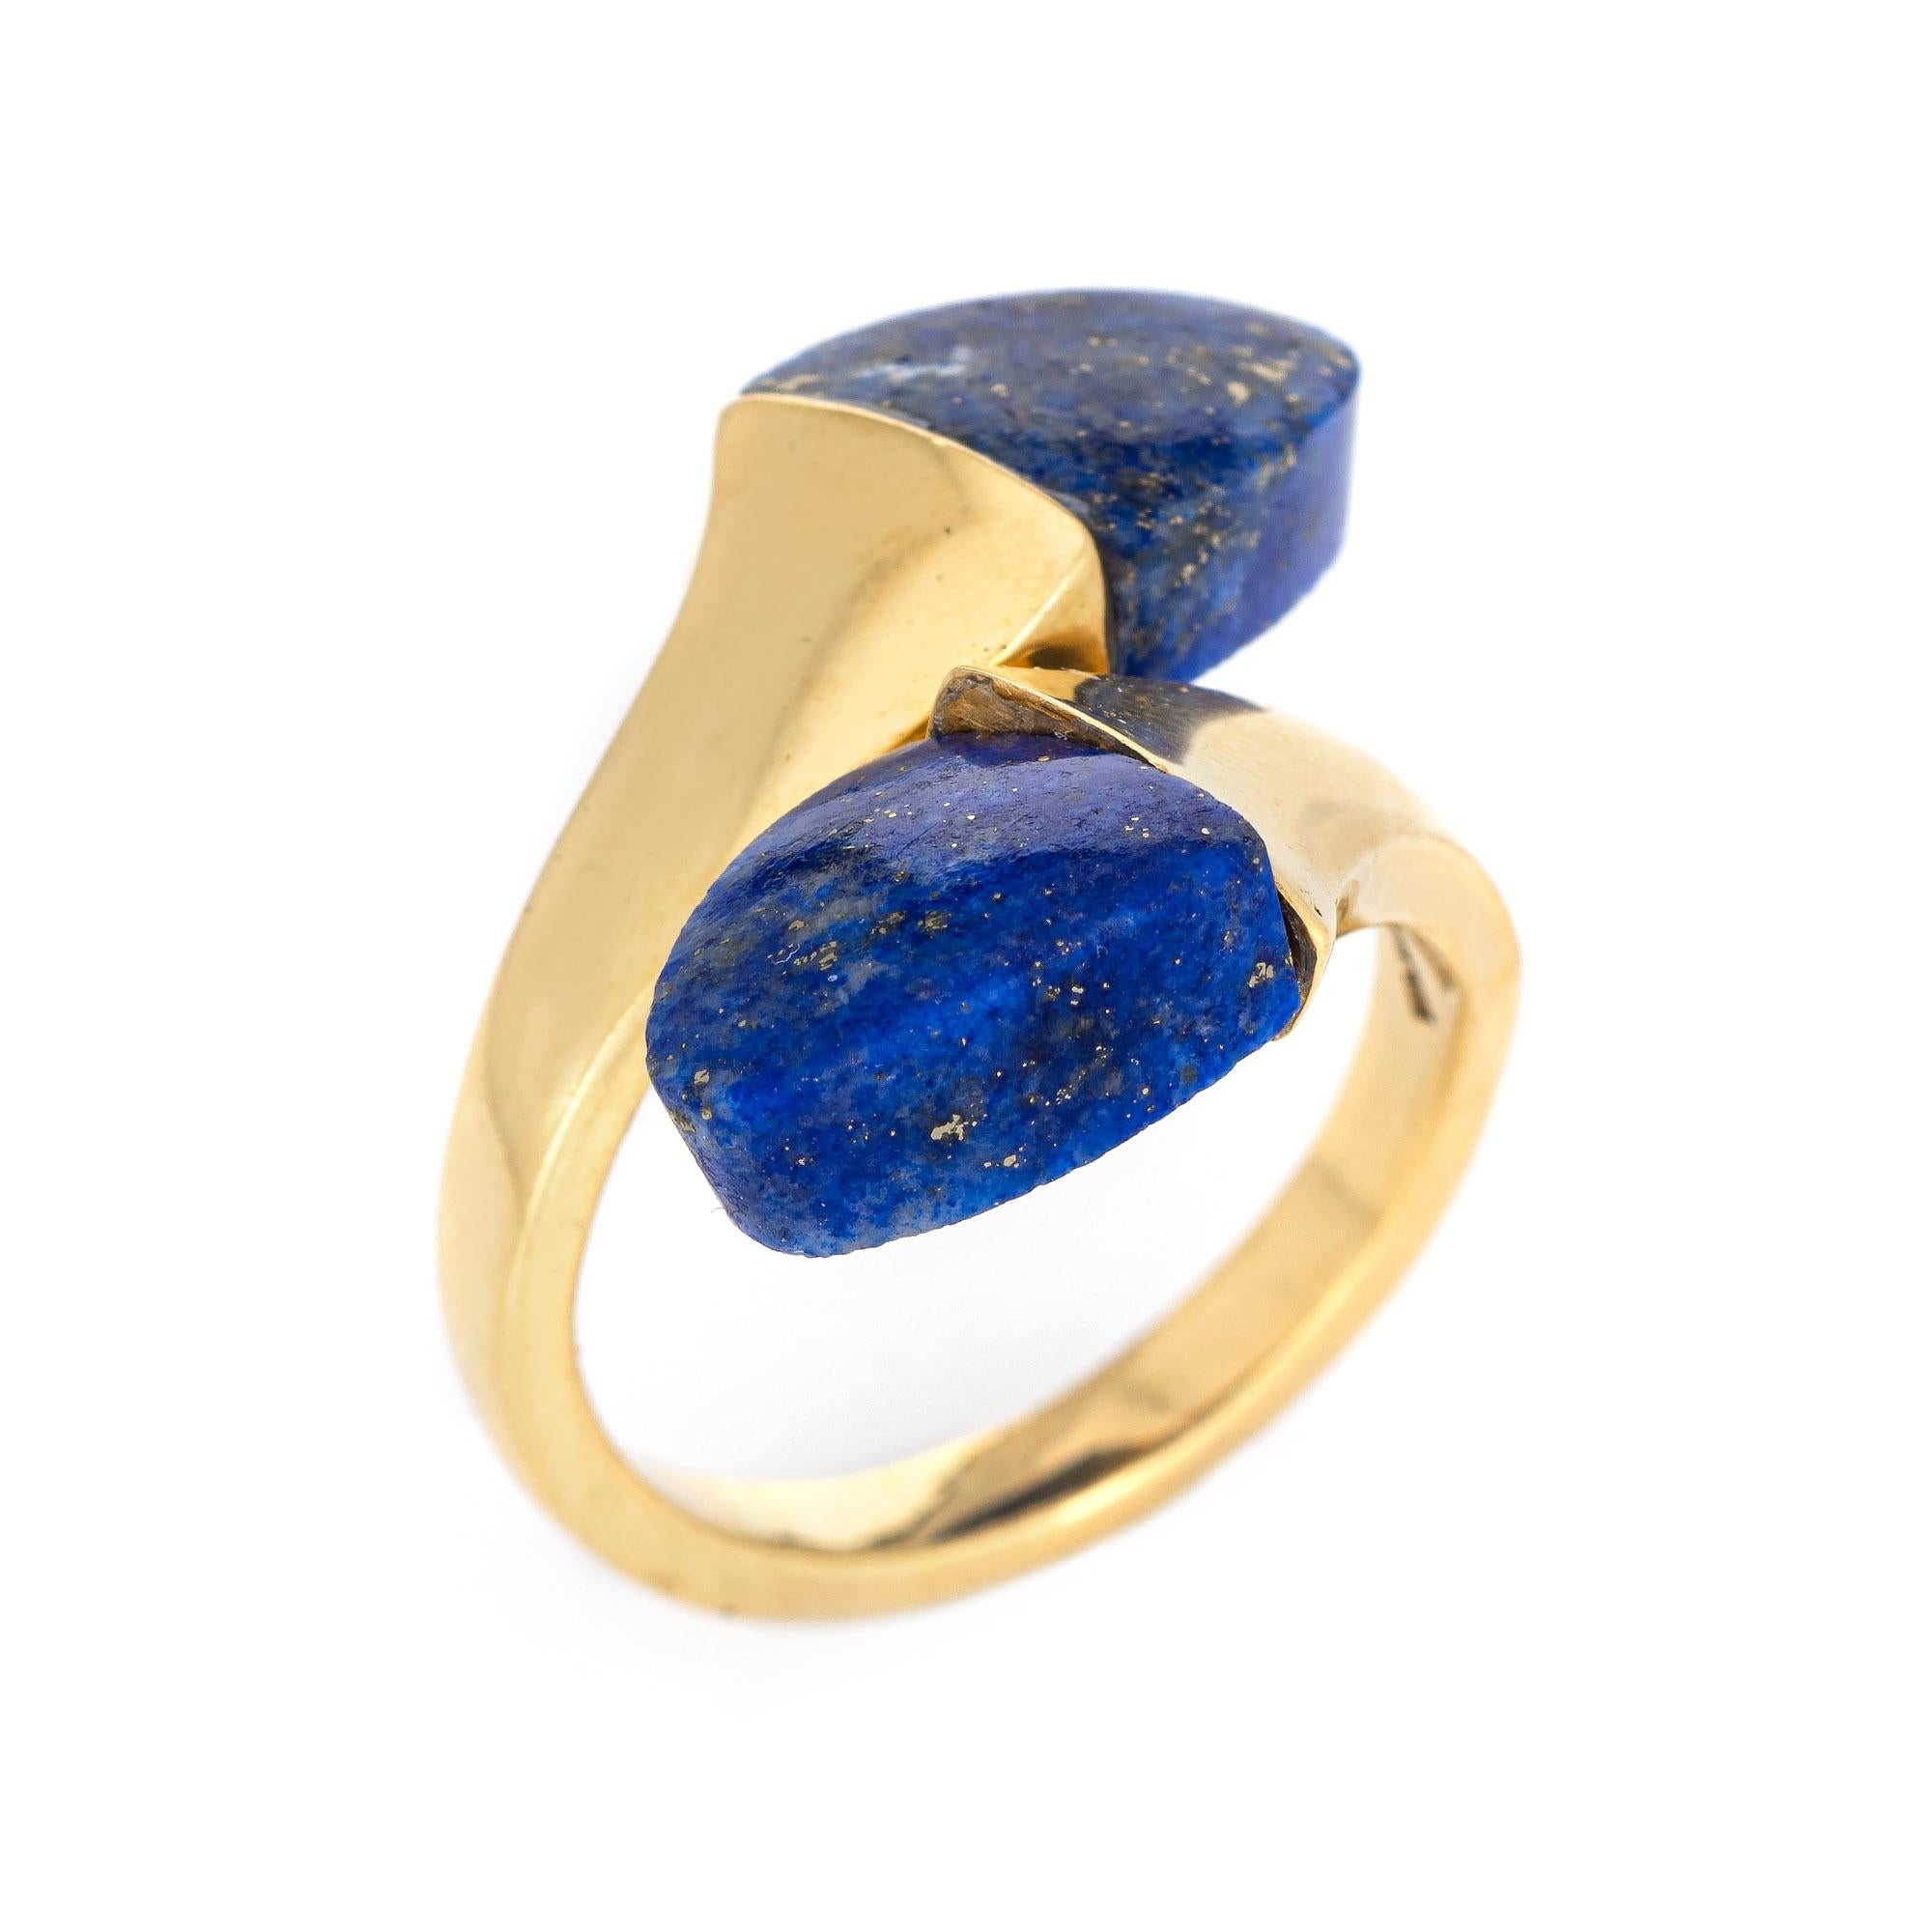 Stylish vintage lapis lazuli bypass ring (circa 1970s to 1980s) crafted in 18 karat yellow gold. 

Two pieces of lapis lazuli measure 10mm x 9.5mm. The lapis is in excellent condition and free of cracks or chips. 

The lapis lazuli is set in a